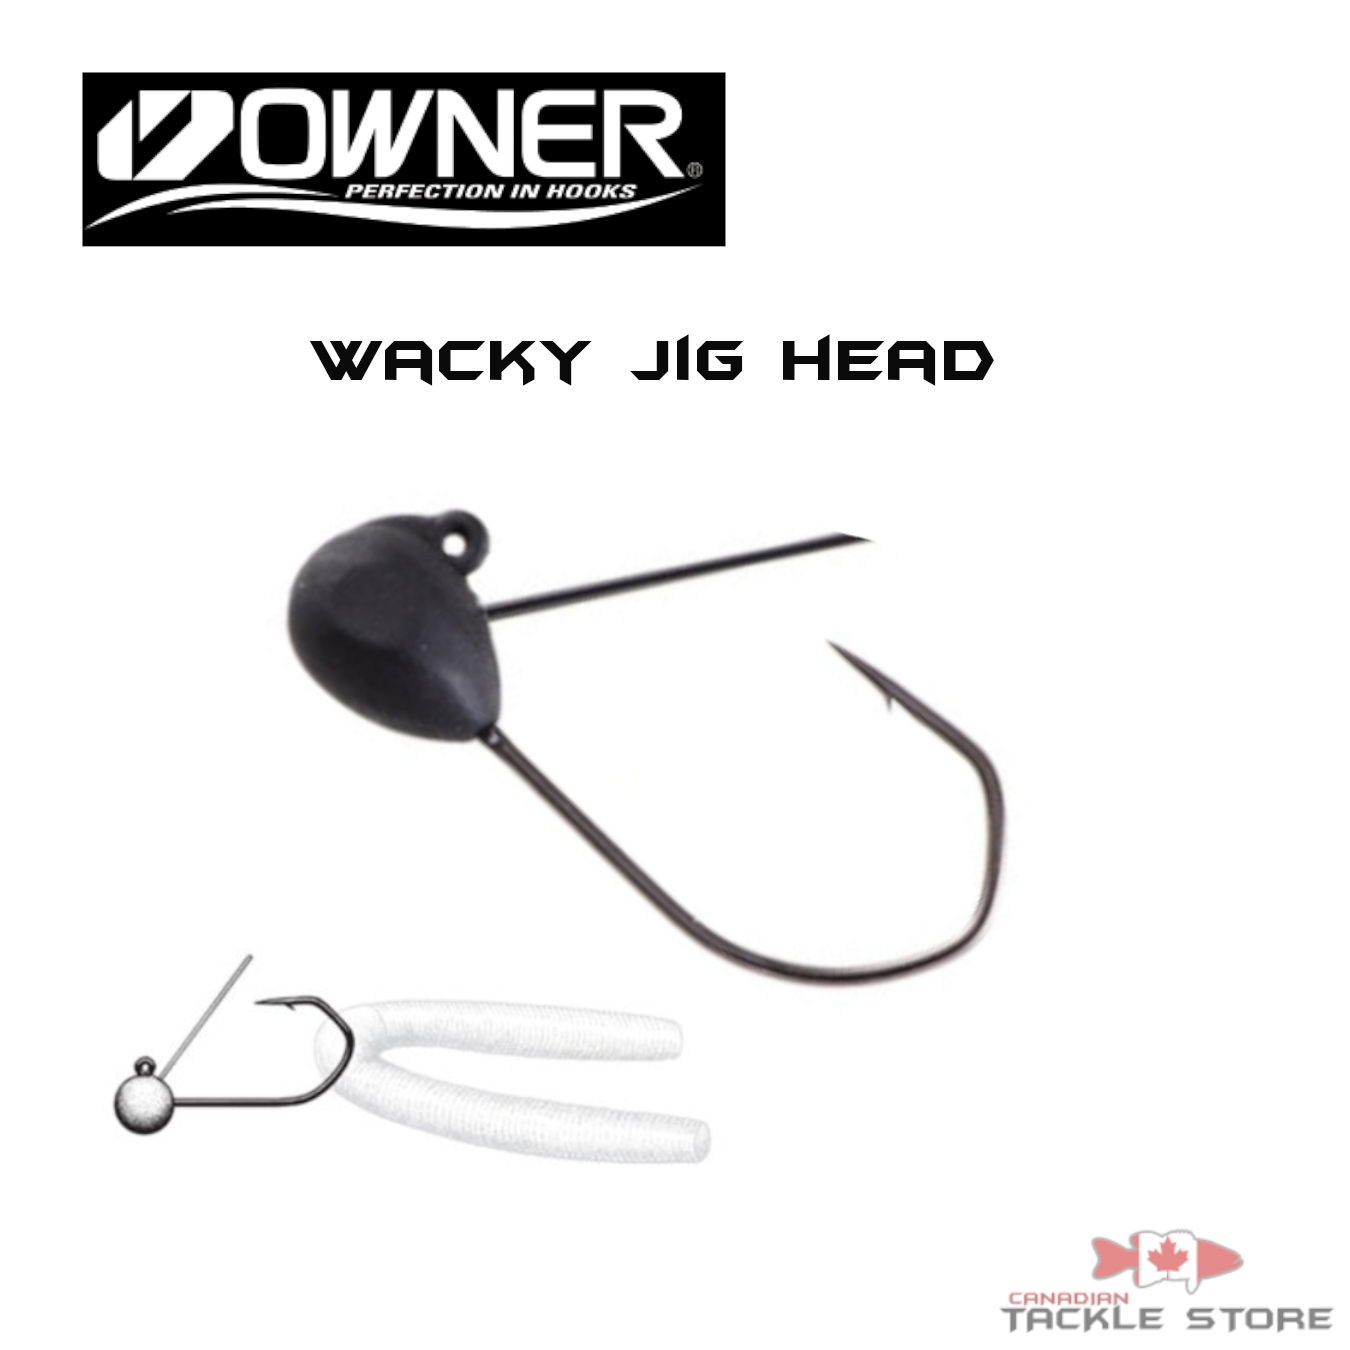 Owner Wacky Jig Head – Canadian Tackle Store